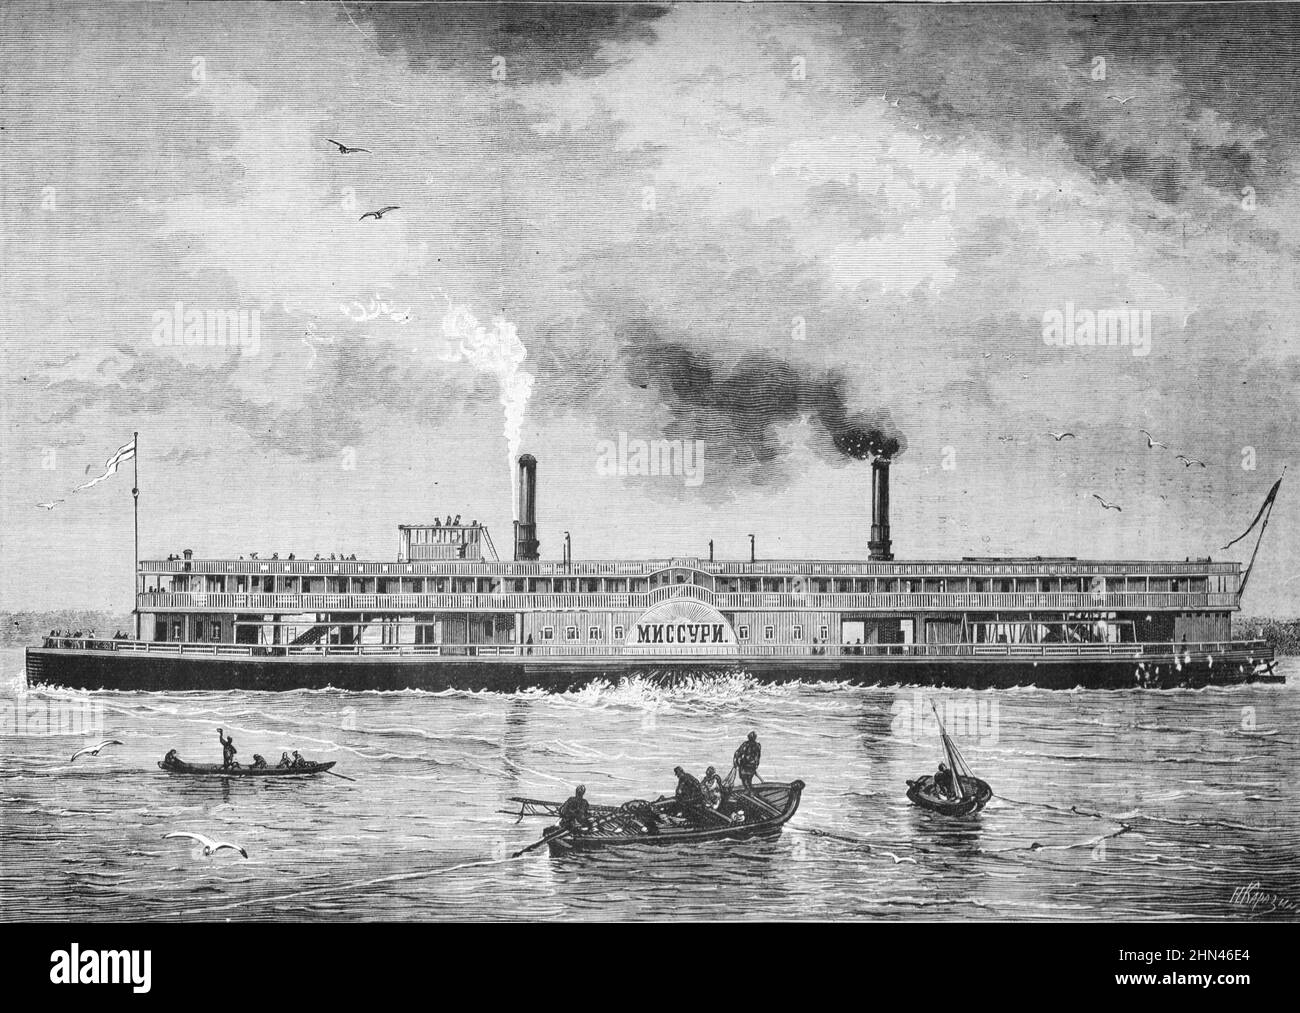 Russian Paddle Steamer or Steam Ship. Vintage Illustration or engraving 1880 Stock Photo